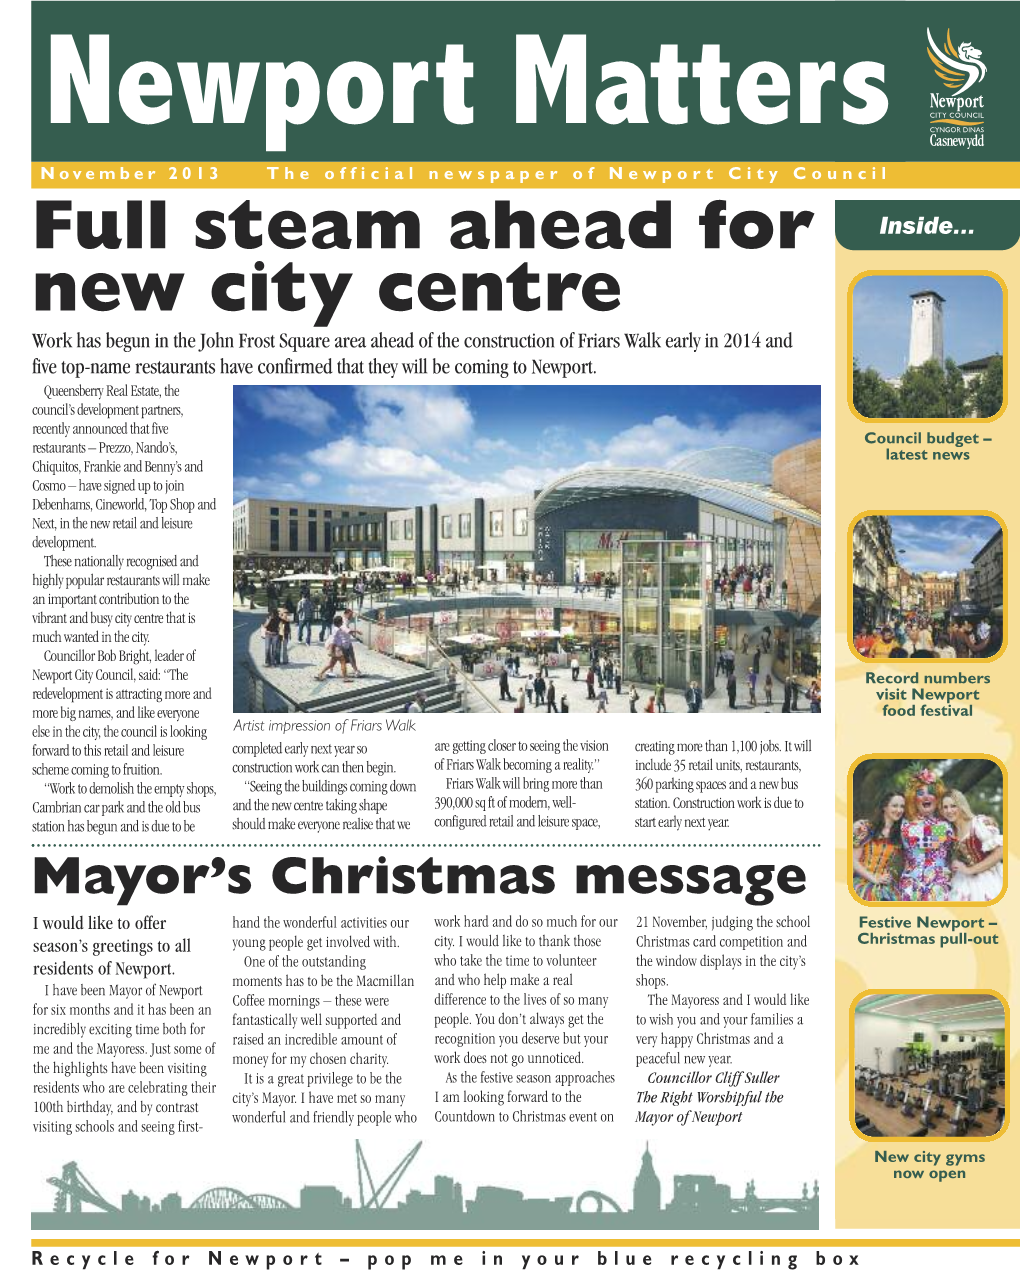 Full Steam Ahead for New City Centre